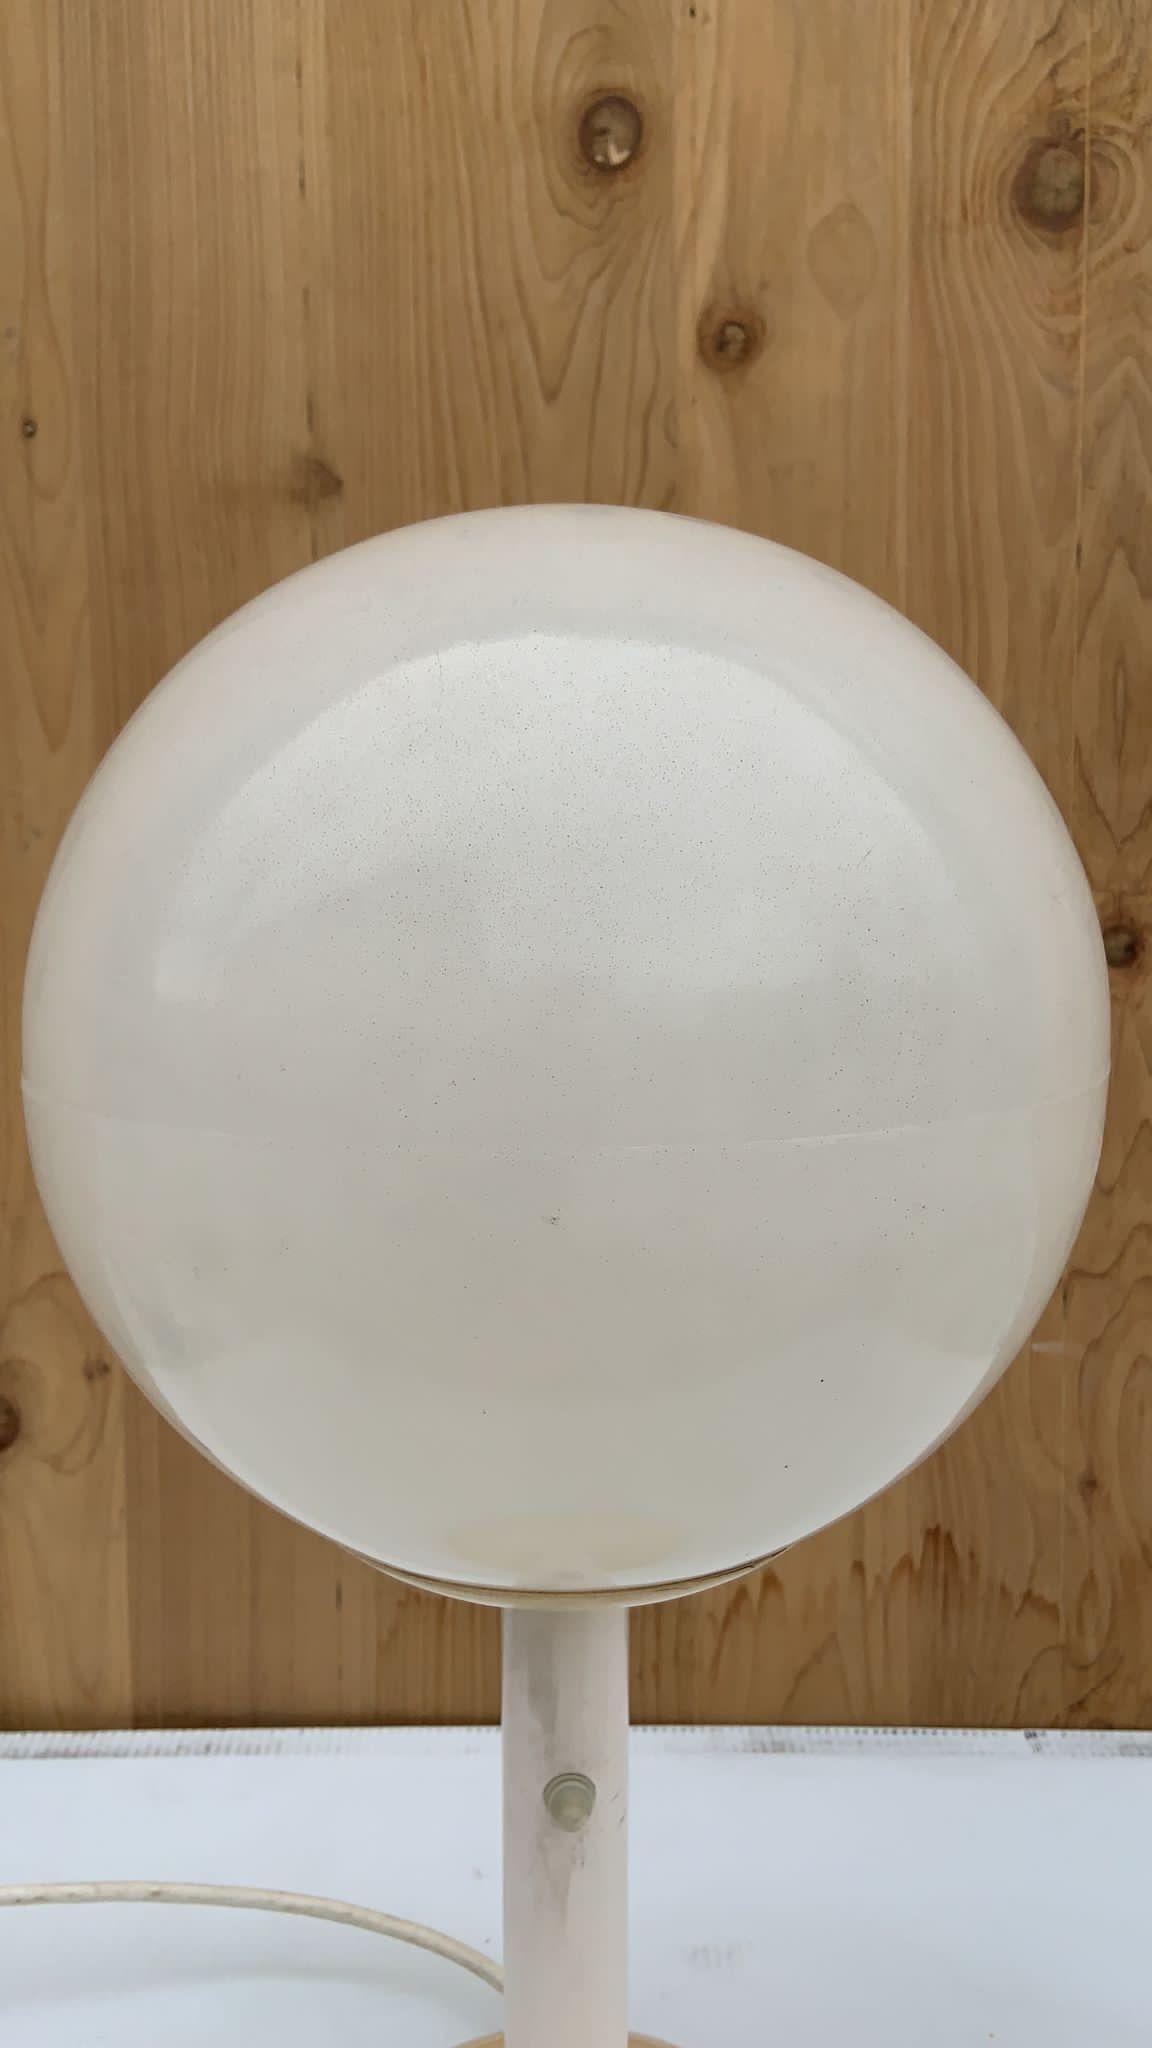 Vintage Mid Century Modern Olympia Lunar 1 Indoor/Outdoor Globe Lamp 

Vintage MCM fun and funky cream acrylic globe lamp made by Olympia Lunar 1. Suitable for indoor and outdoor use. 

Circa 1960 

Dimensions:

H 25